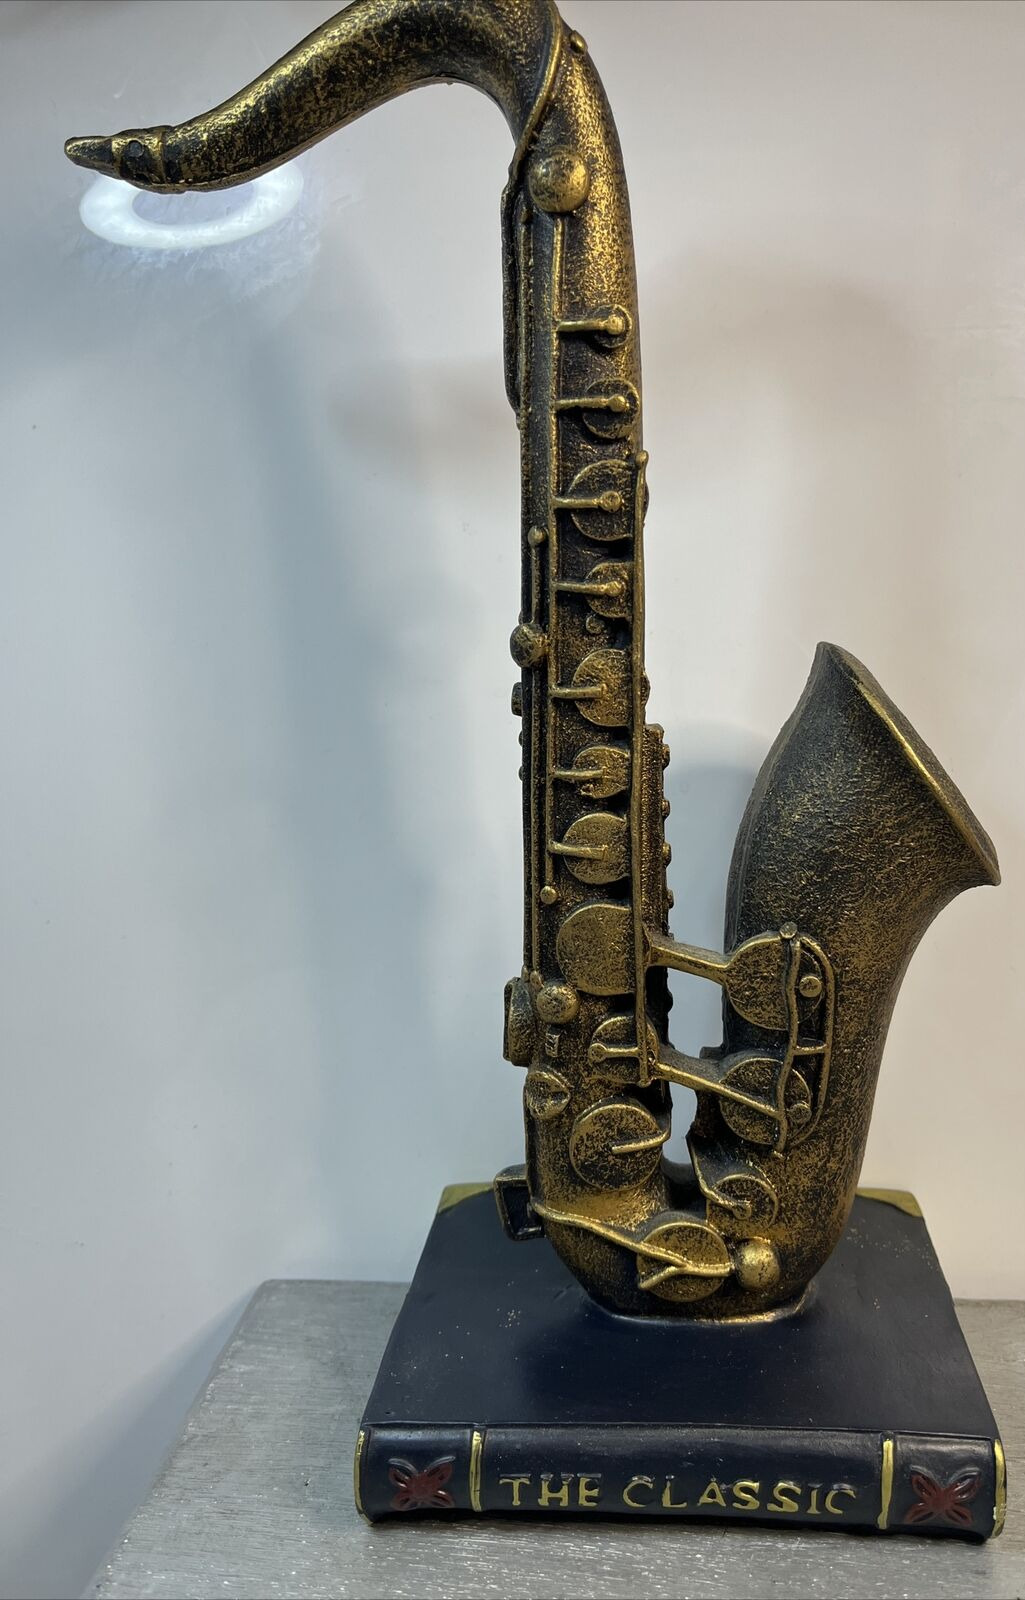 Retro Resin Saxophone with The Classic Book Figurine Display Collectible